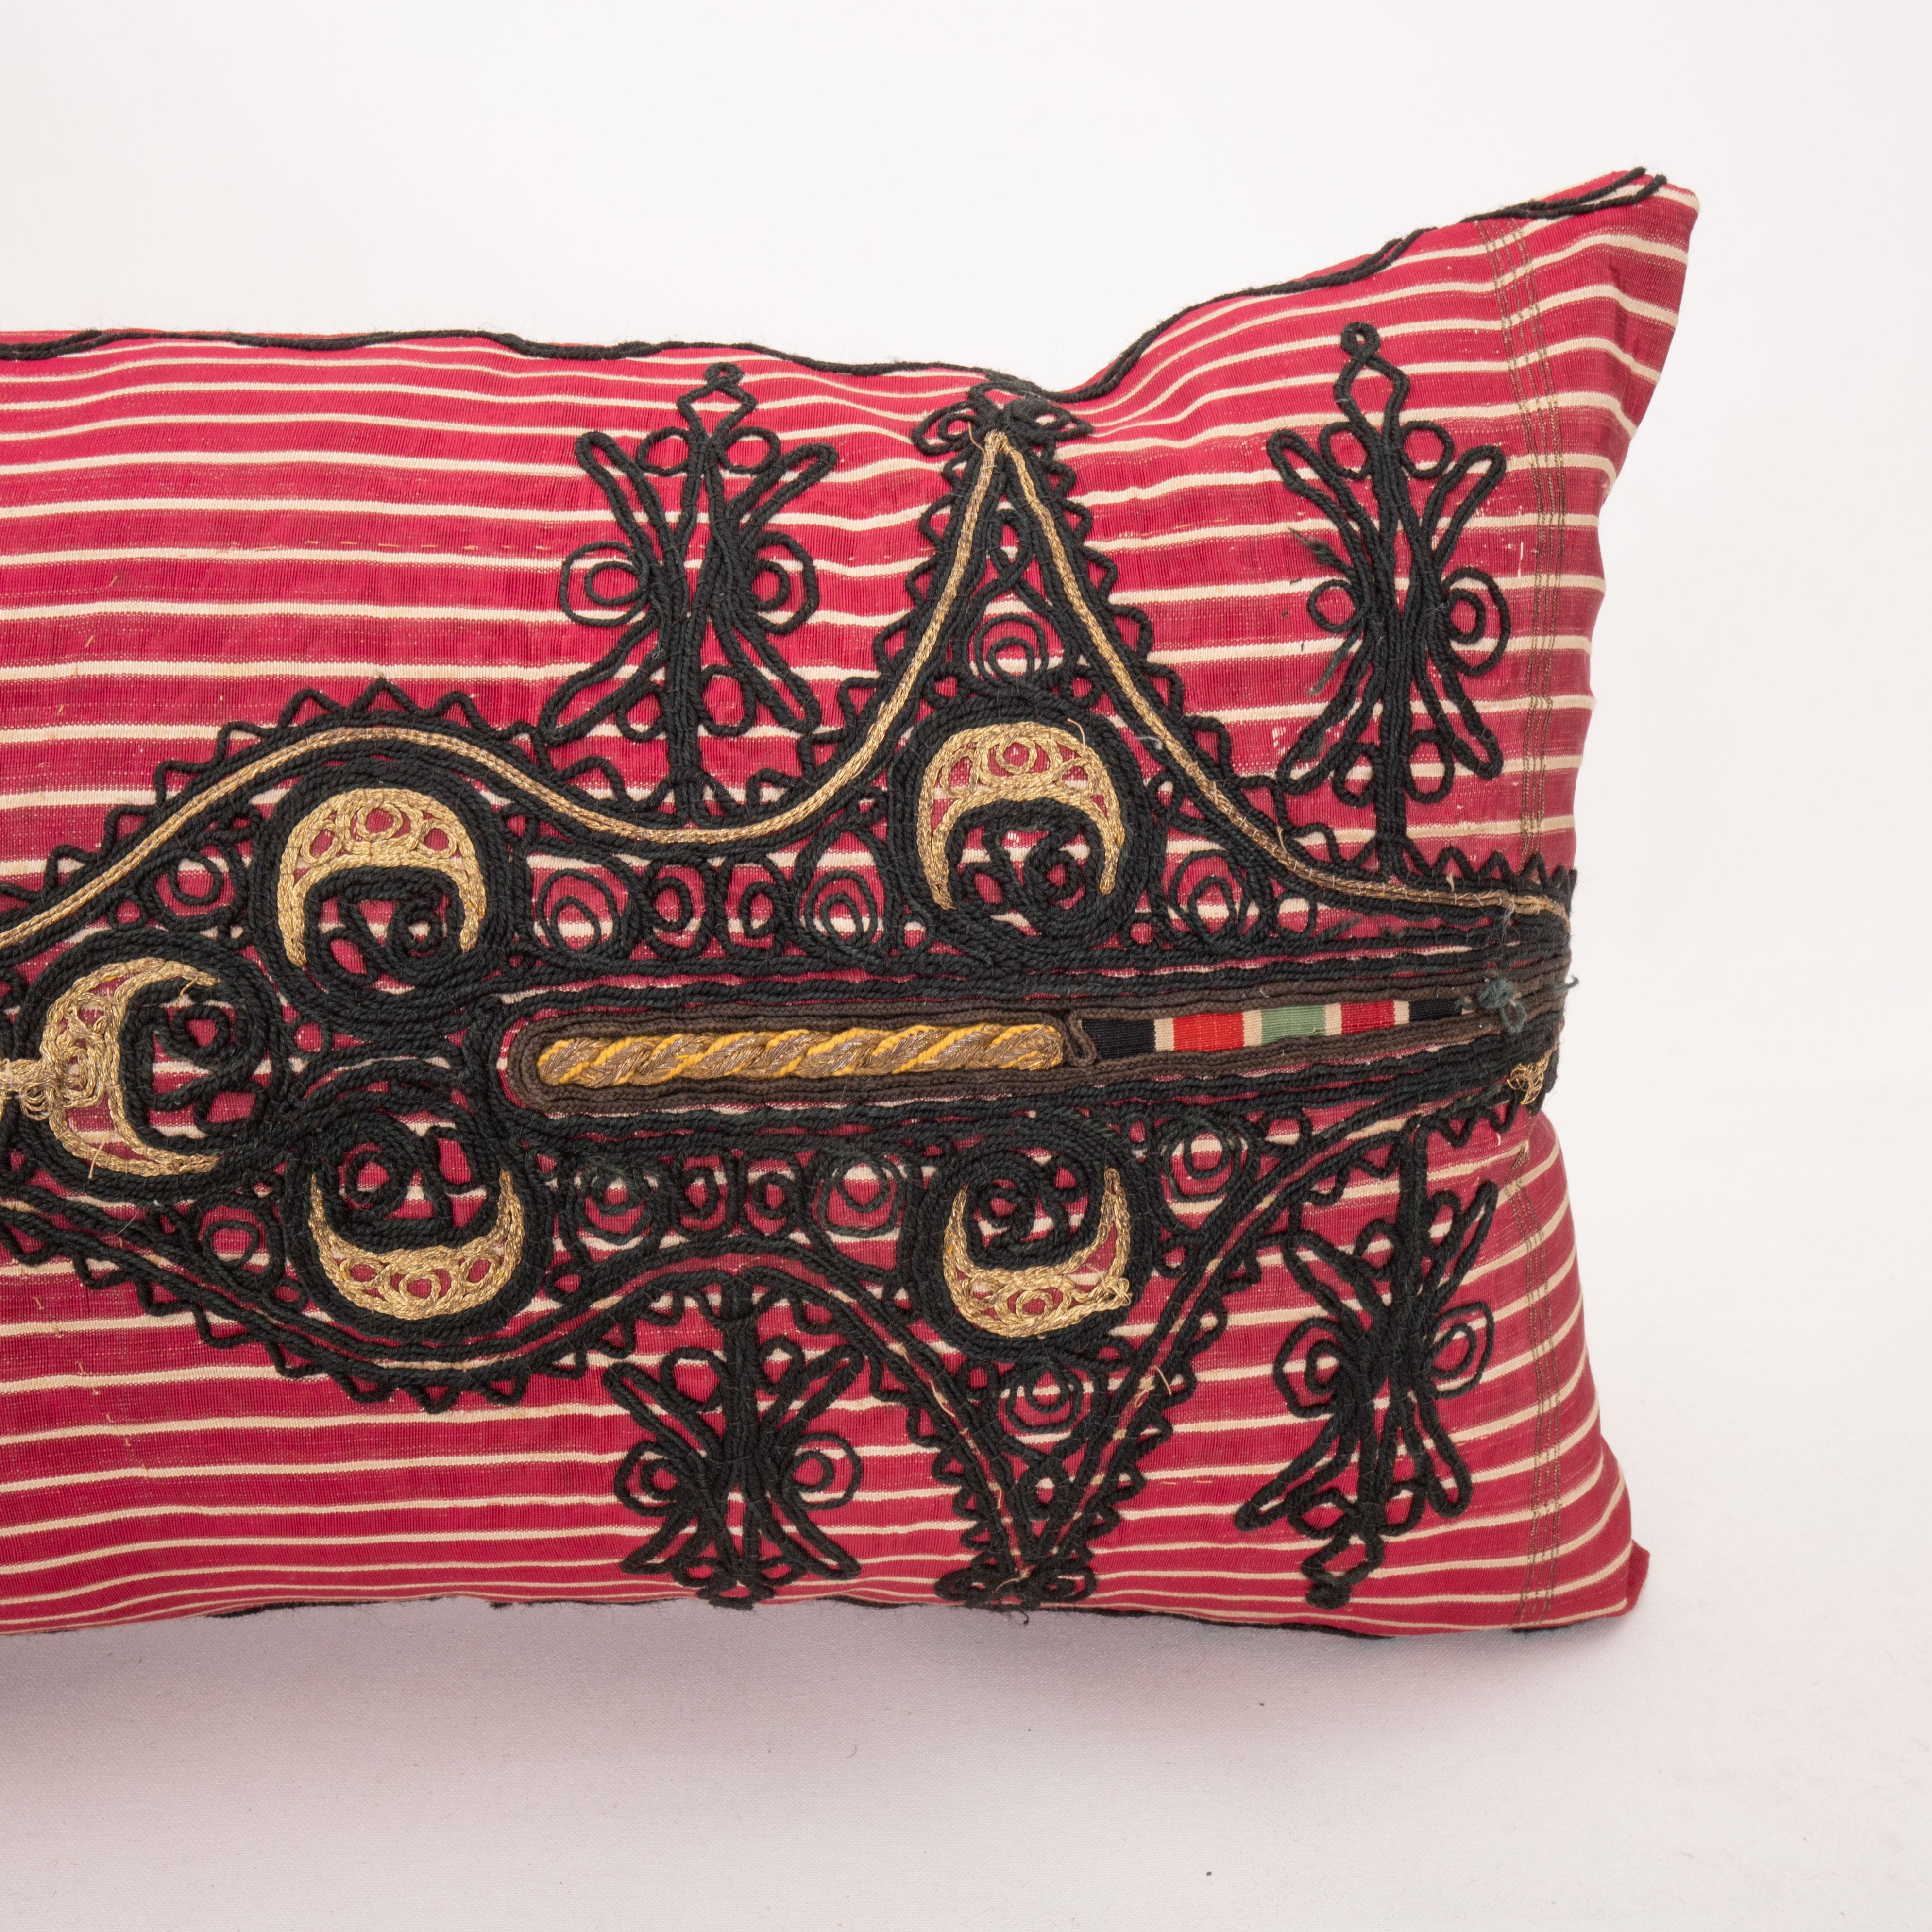 Antique Ottoman Turkish Pillow Case, Early 20th C. In Good Condition For Sale In Istanbul, TR